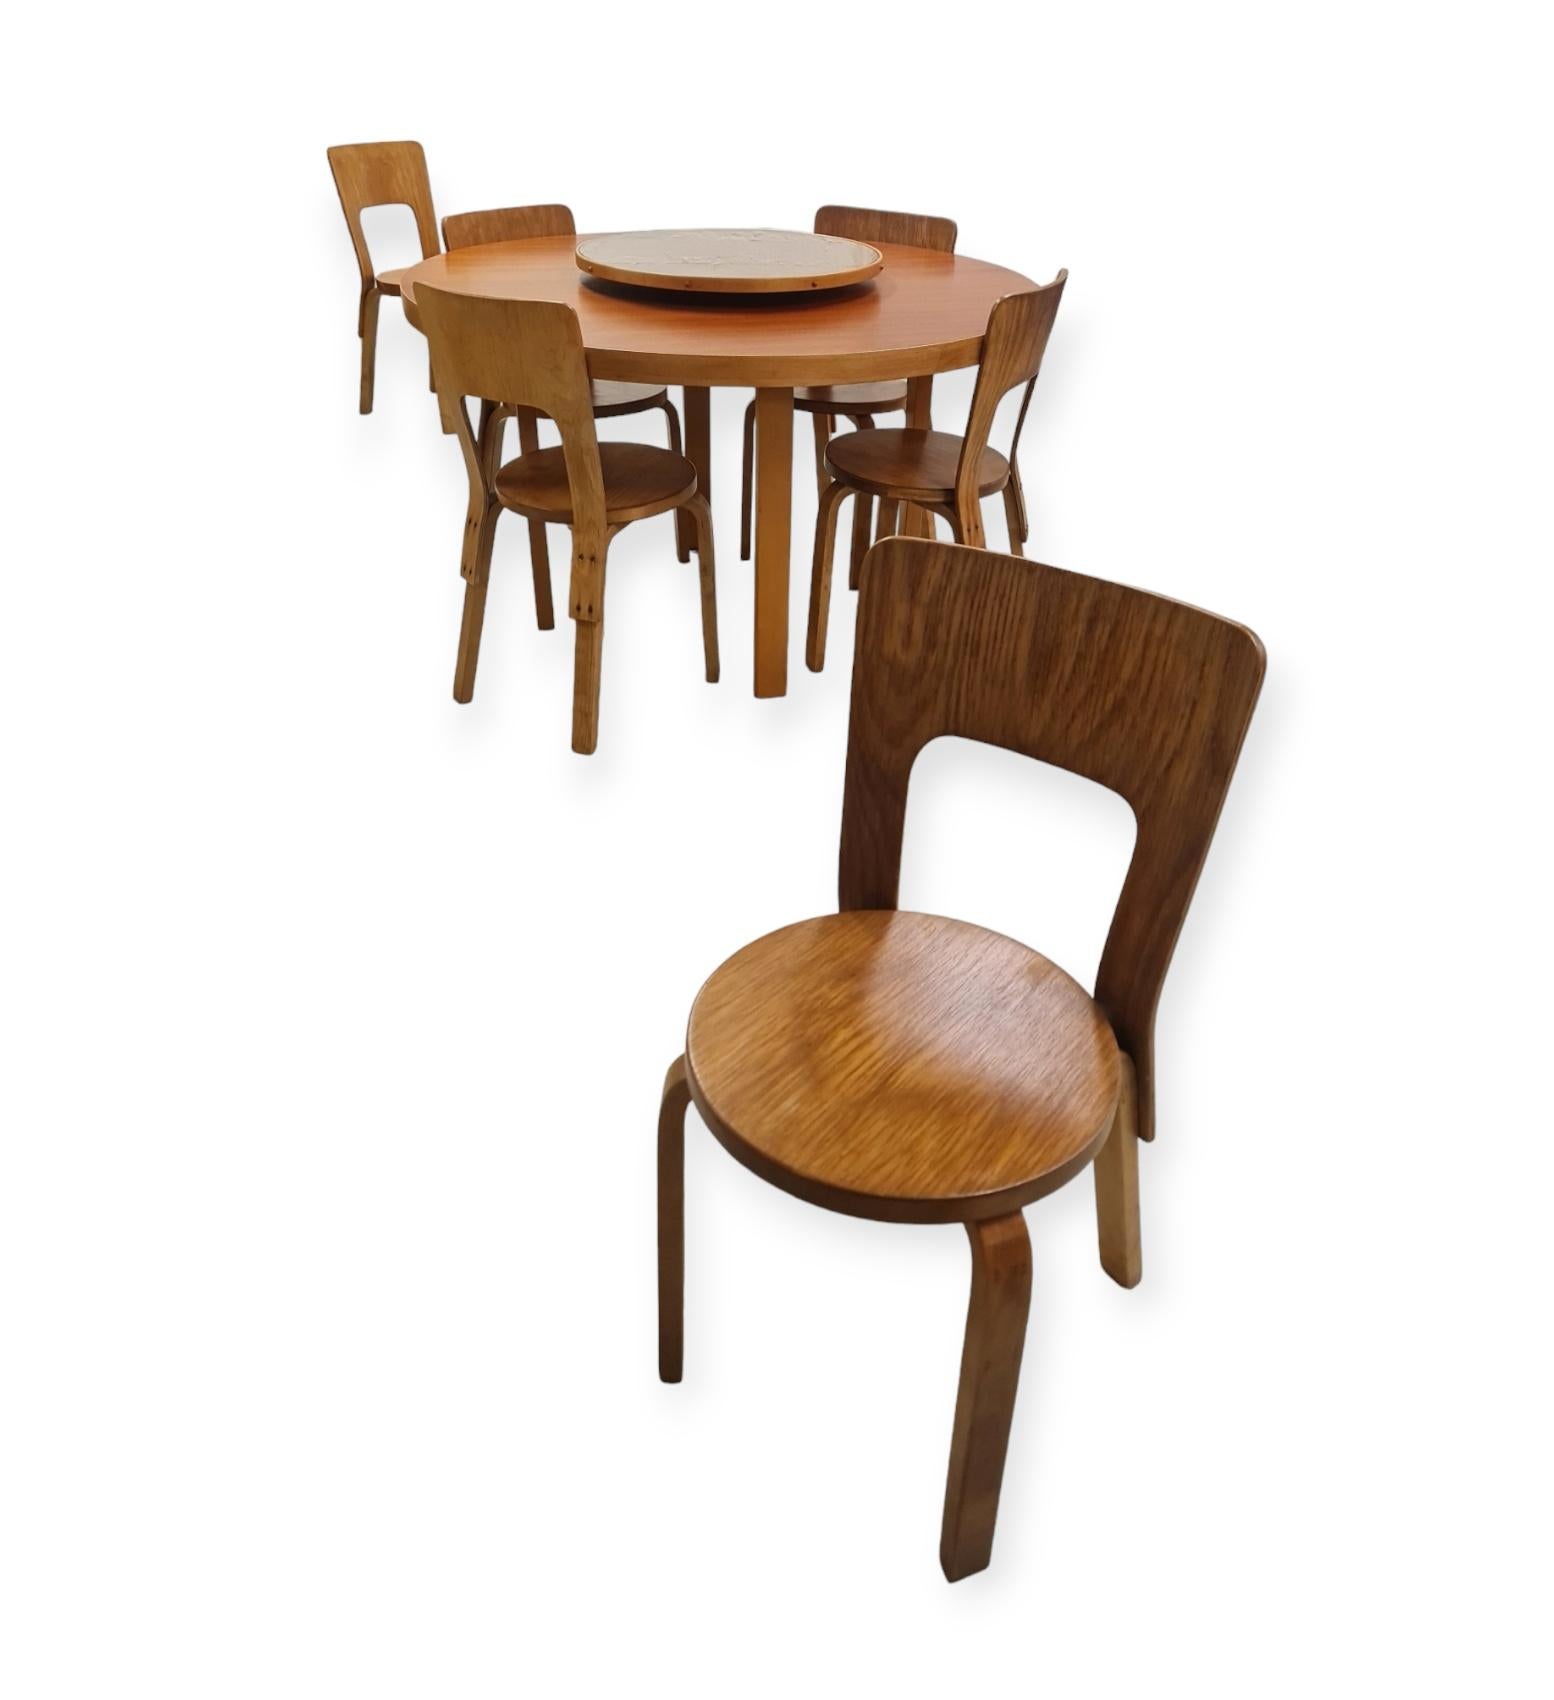 Alvar Aalto Dinning Set with Lazy Susan and 6 Model 66 chairs, 1940s For Sale 4